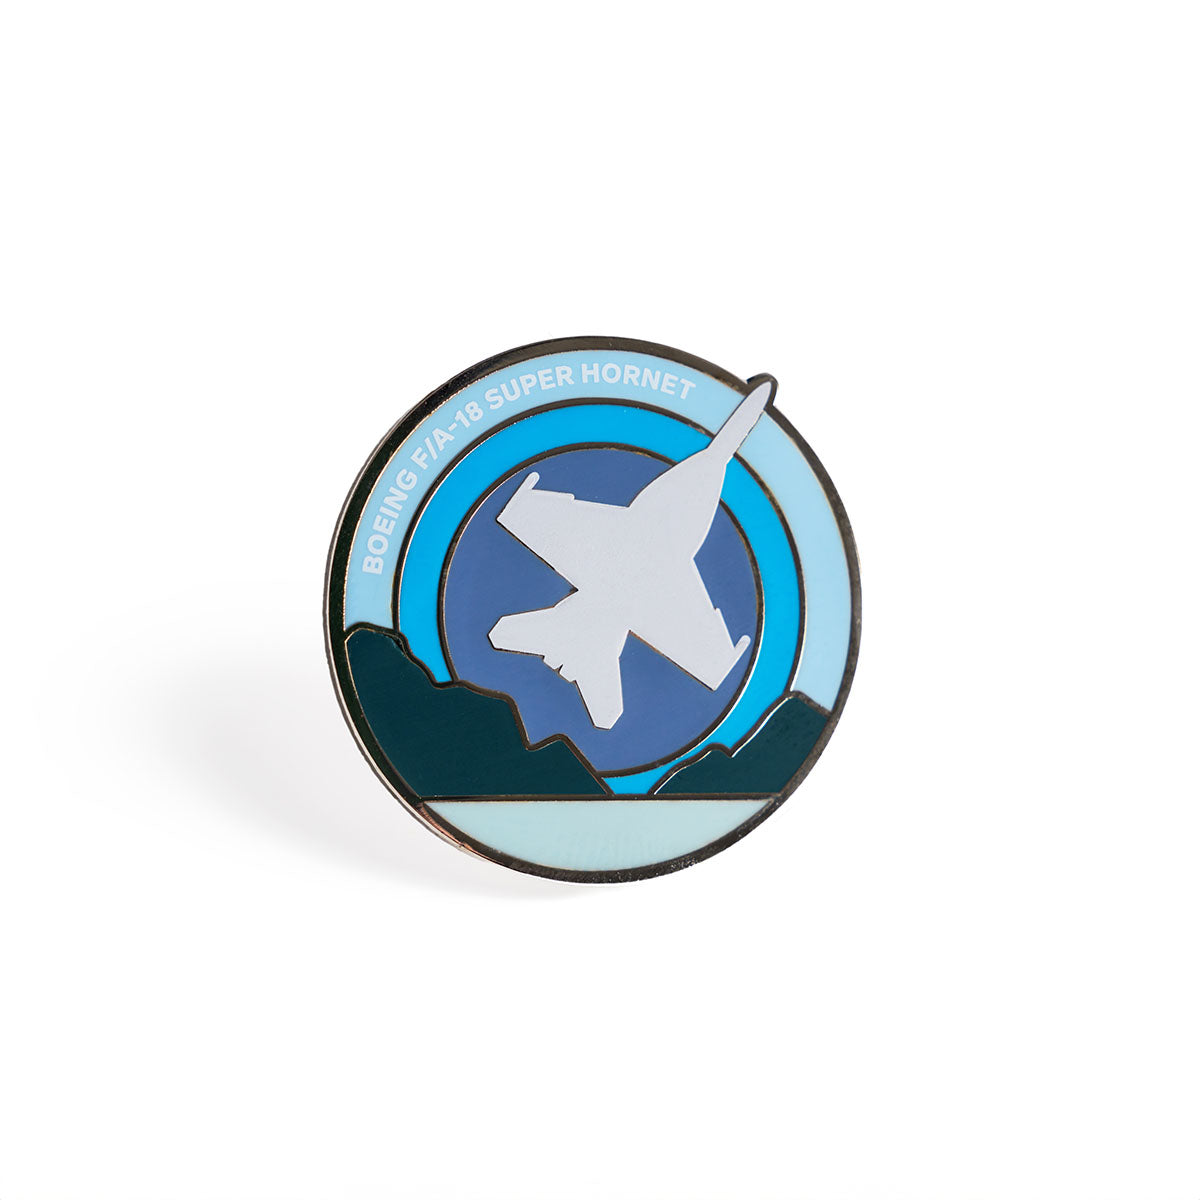 Skyward lapel pin, featuring the iconic Boeing F/A-18 Super Hornet in an enamel roundel design.